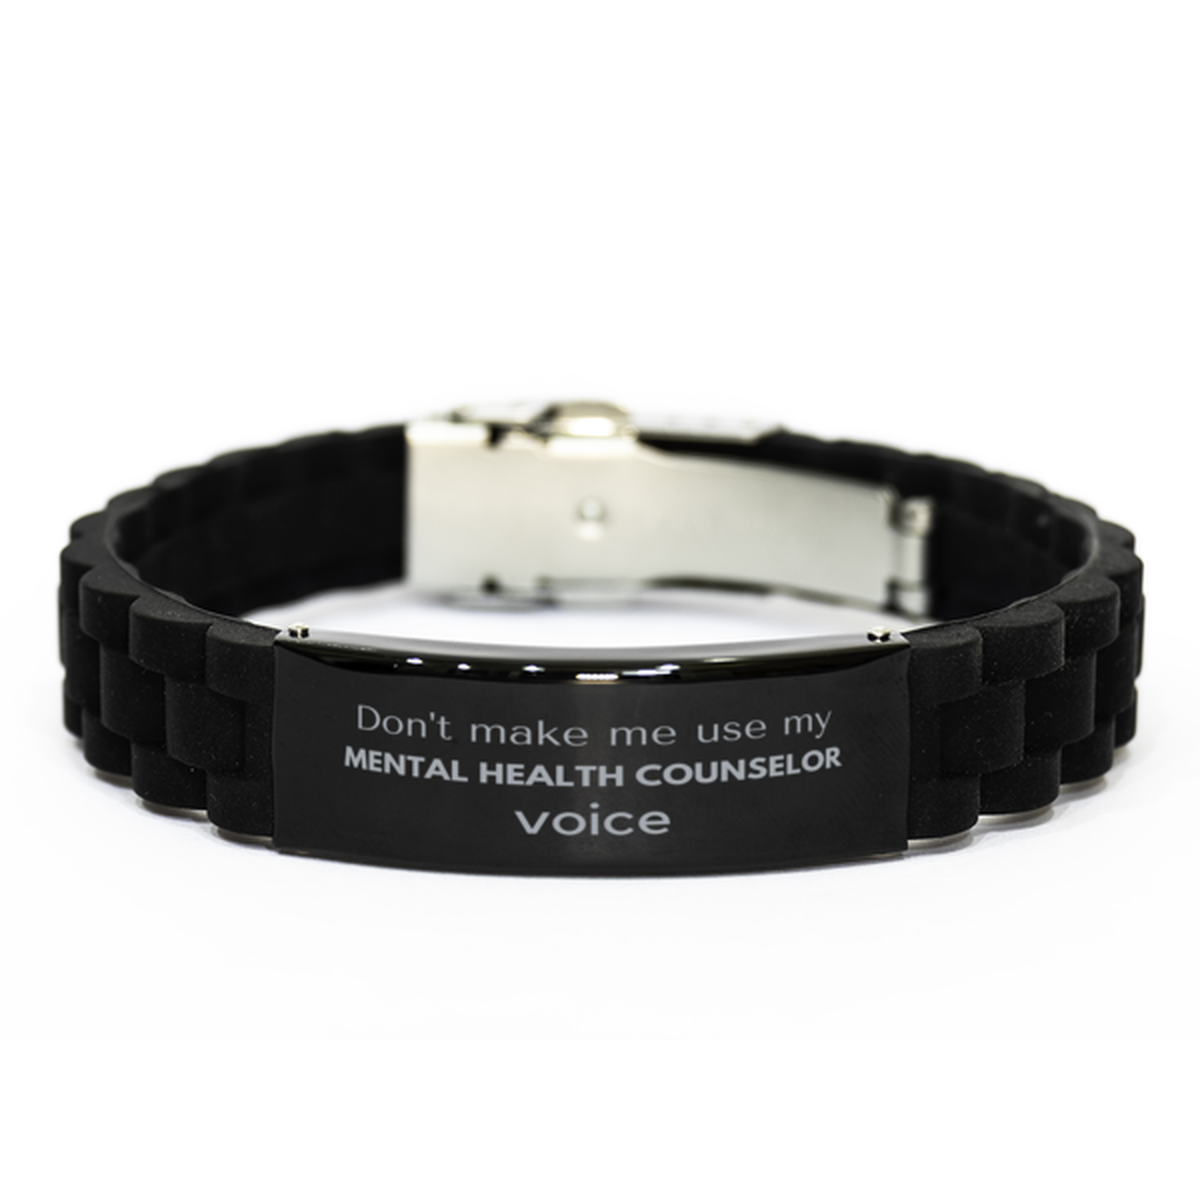 Don't make me use my Mental Health Counselor voice, Sarcasm Mental Health Counselor Gifts, Christmas Mental Health Counselor Black Glidelock Clasp Bracelet Birthday Unique Gifts For Mental Health Counselor Coworkers, Men, Women, Colleague, Friends